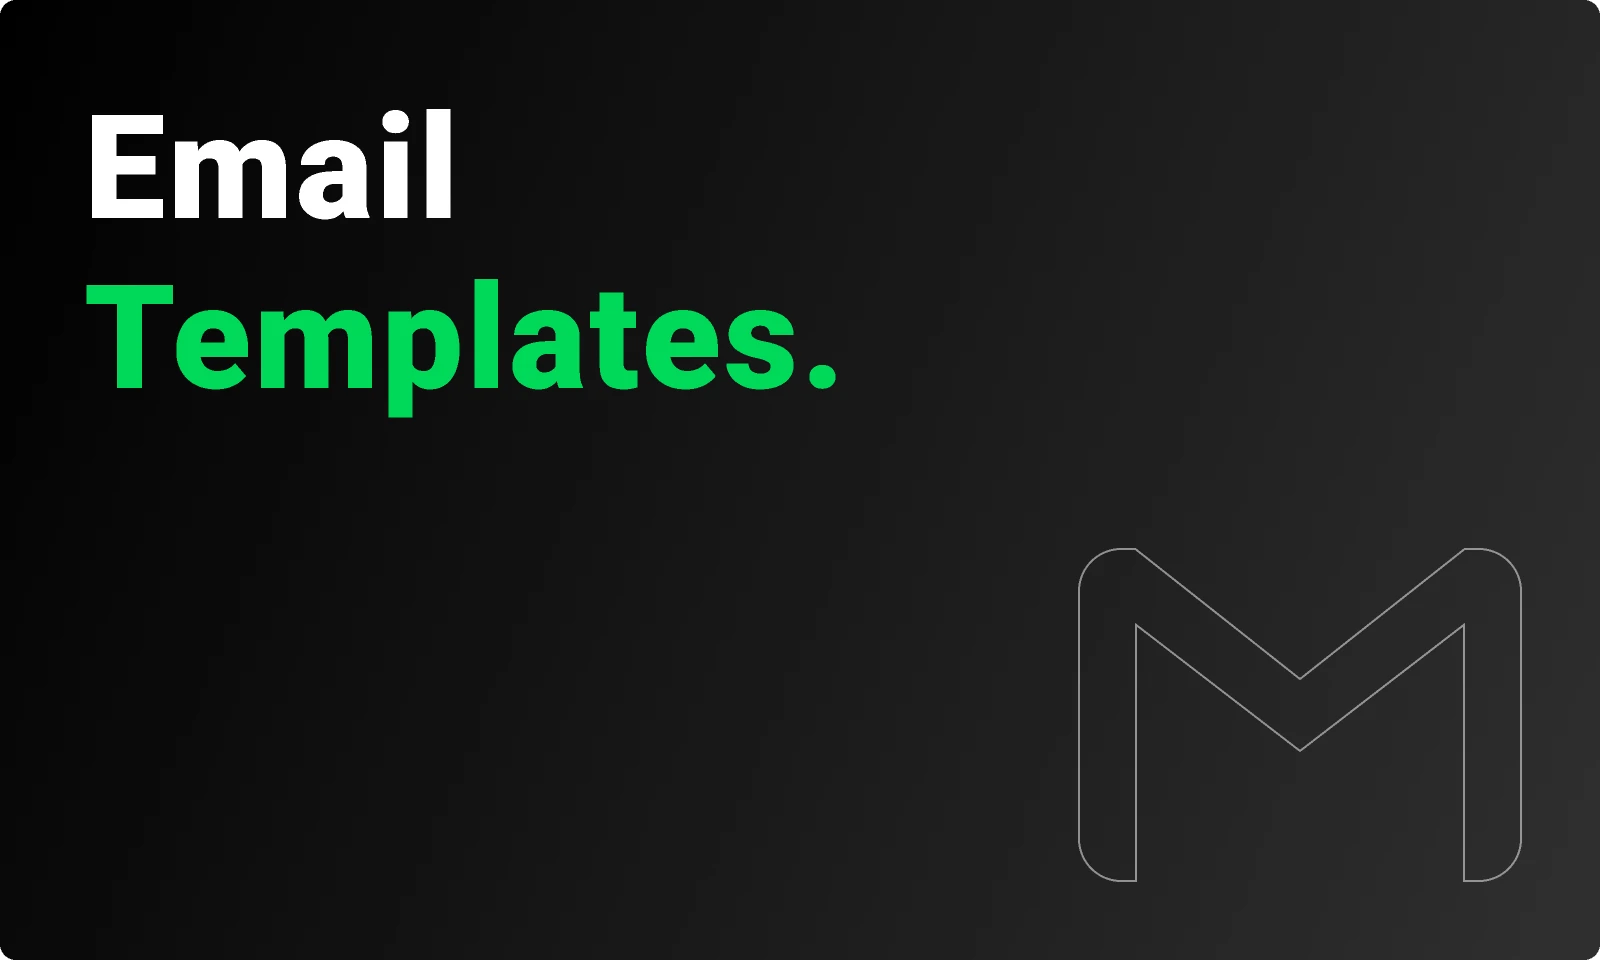 Email Templates free figma template for Uncategorized